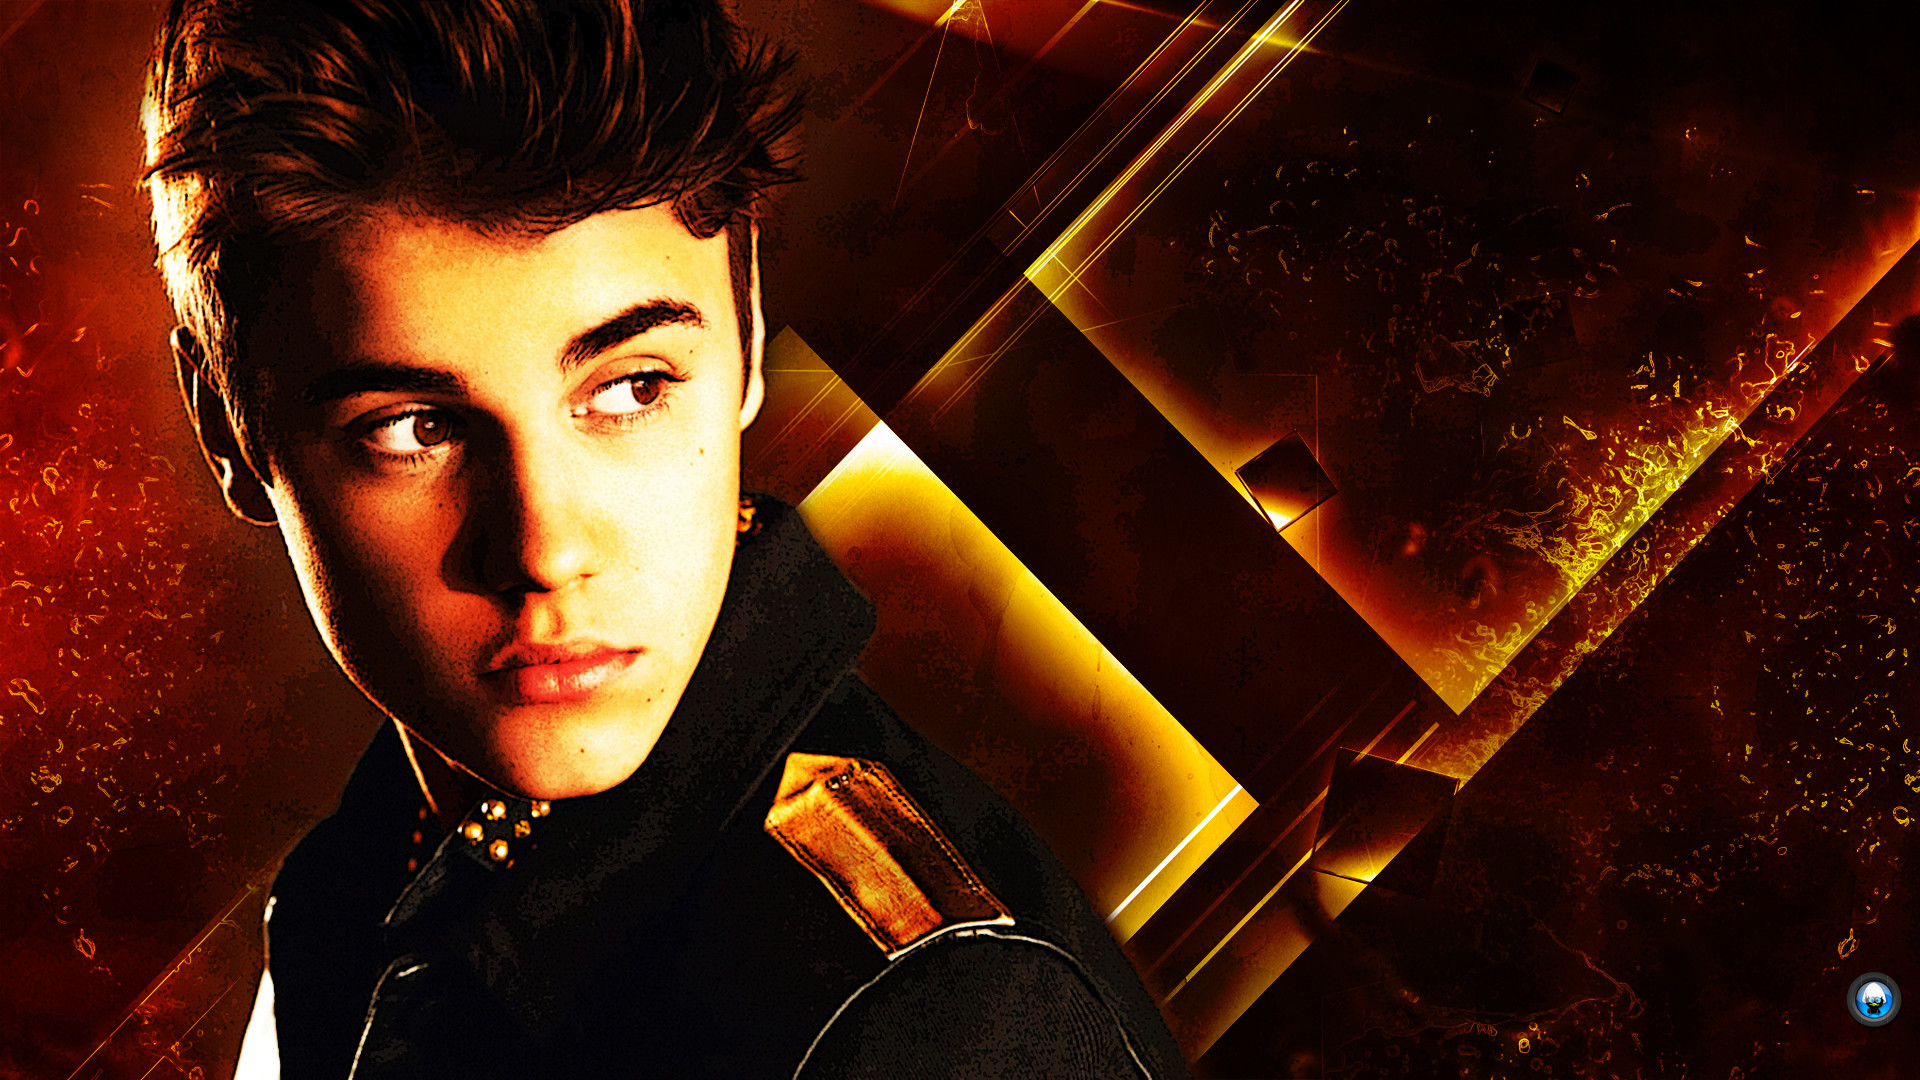 Justin Bieber HD Wallpapers 2014, QC878 Full HD Wallpapers For